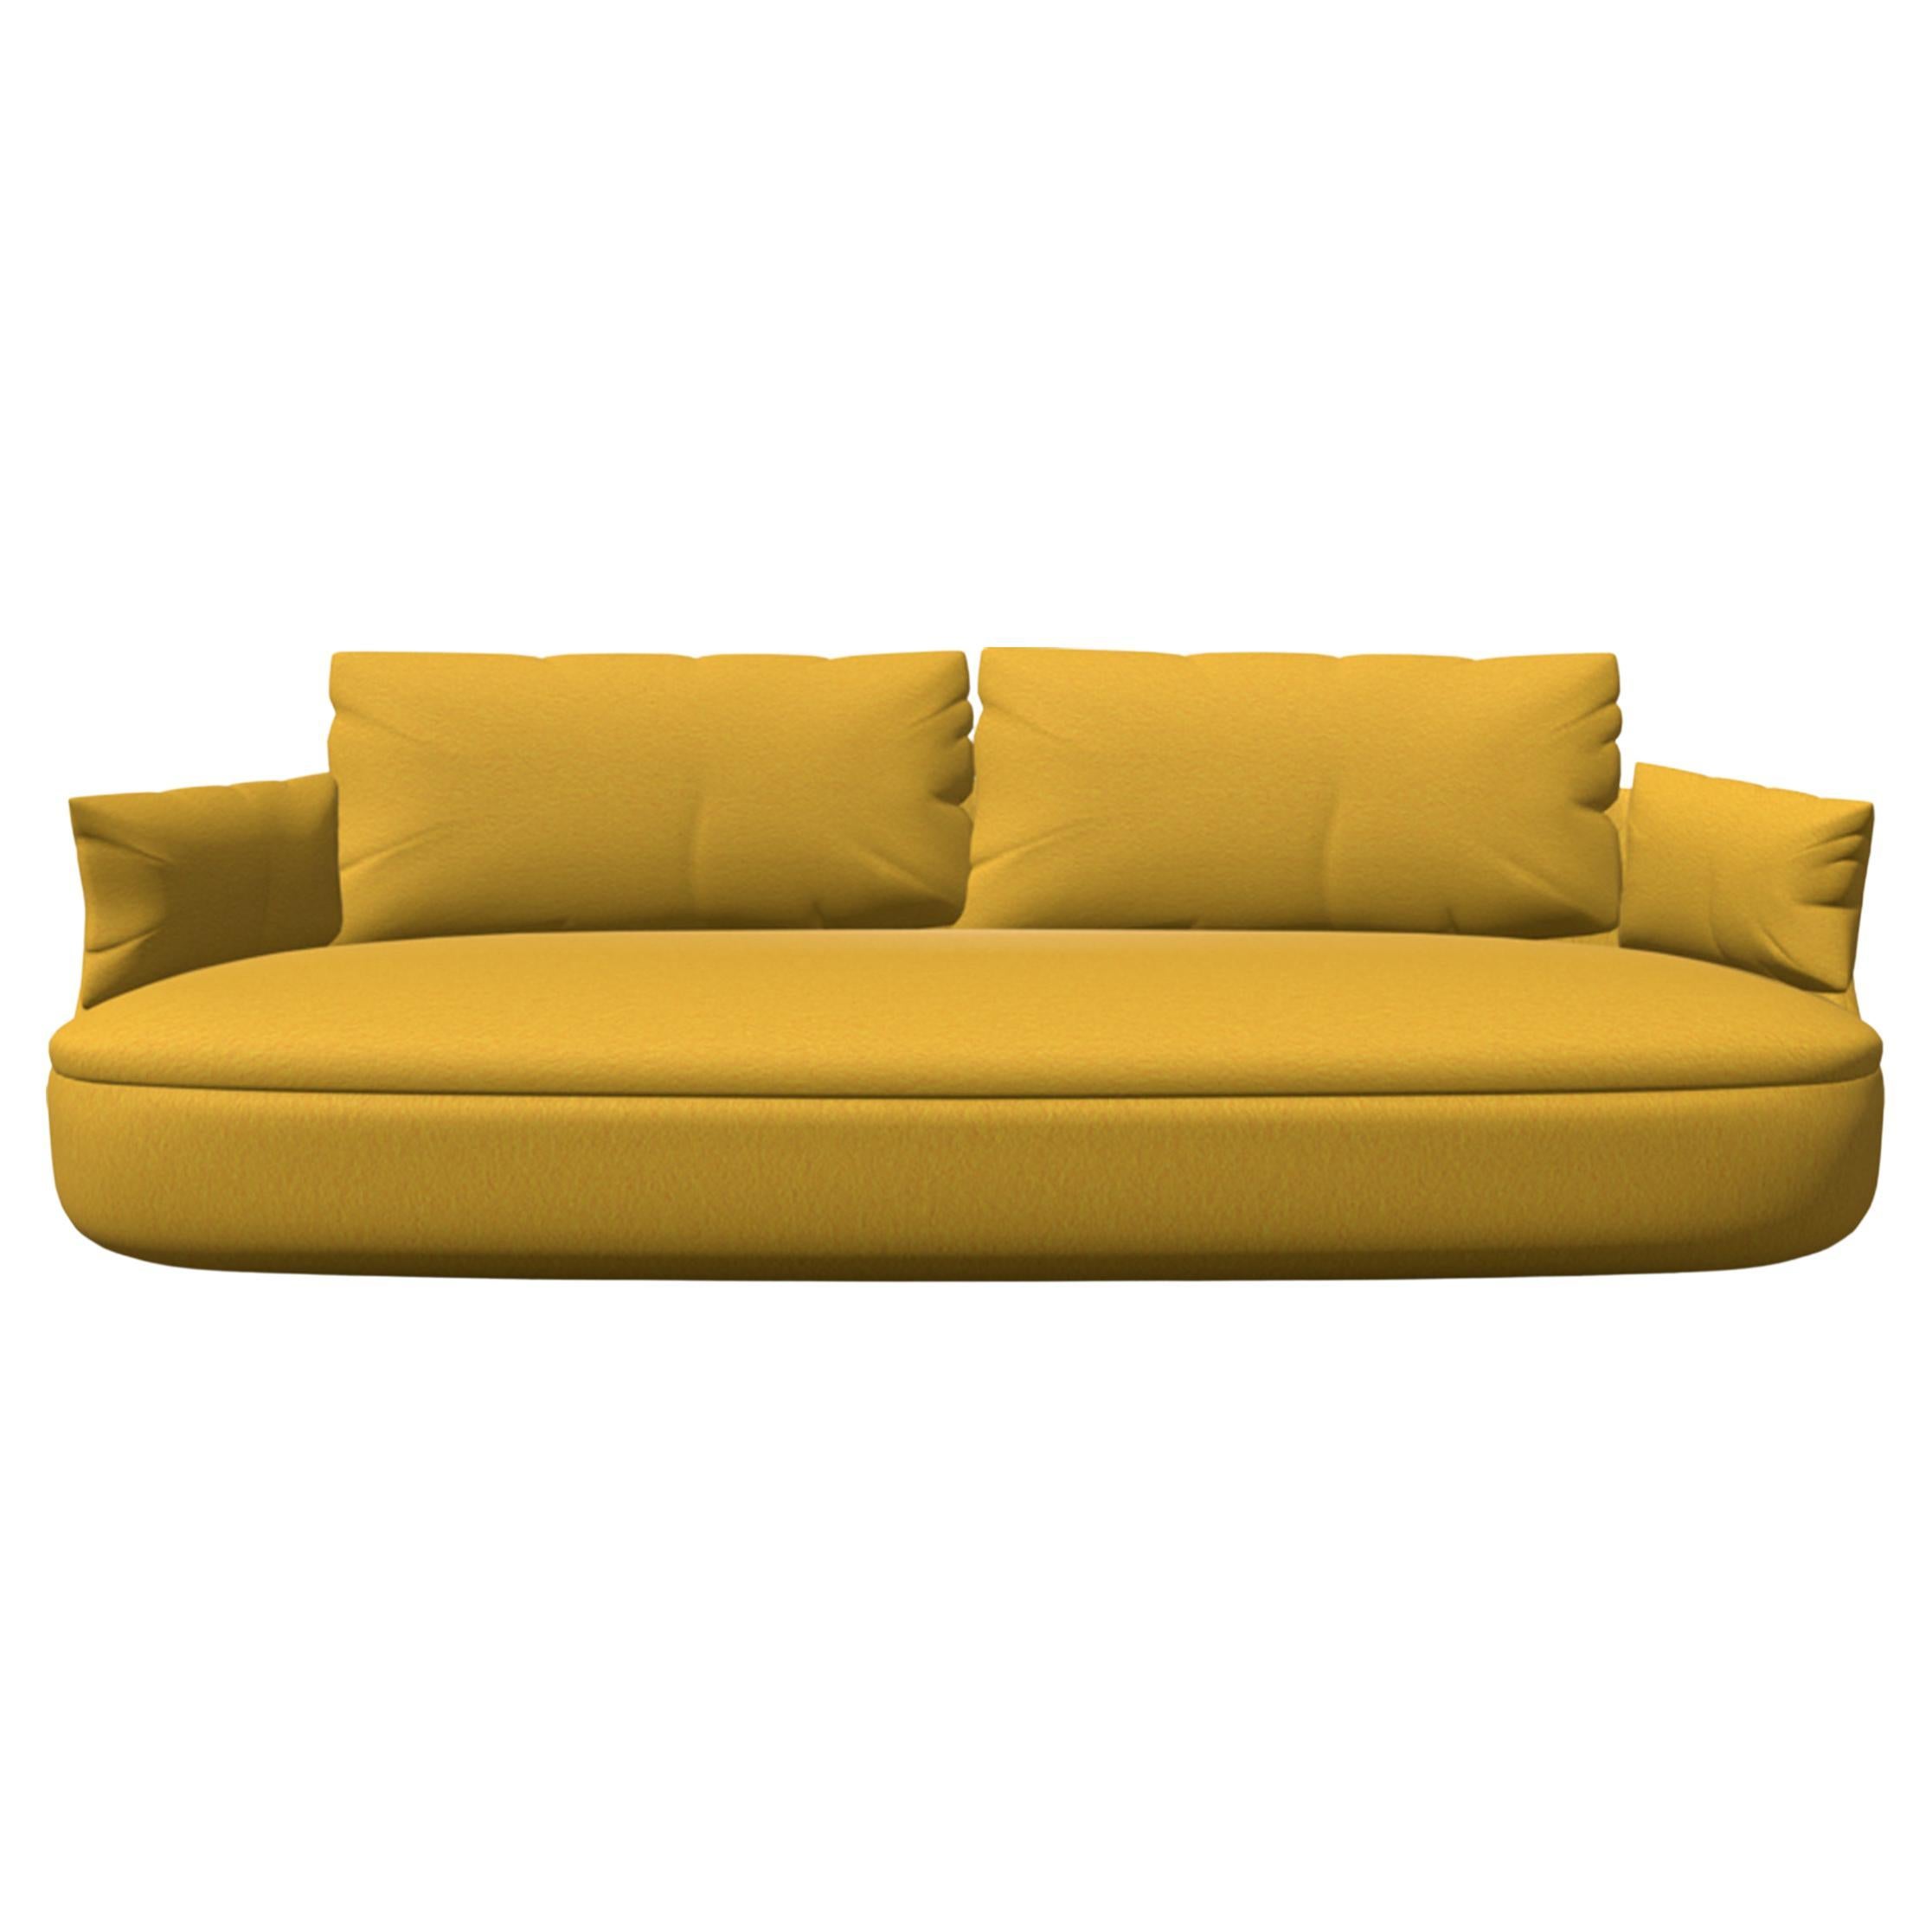 Moooi Bart Basic Sofa in Divina 3, 426 Yellow Upholstery For Sale